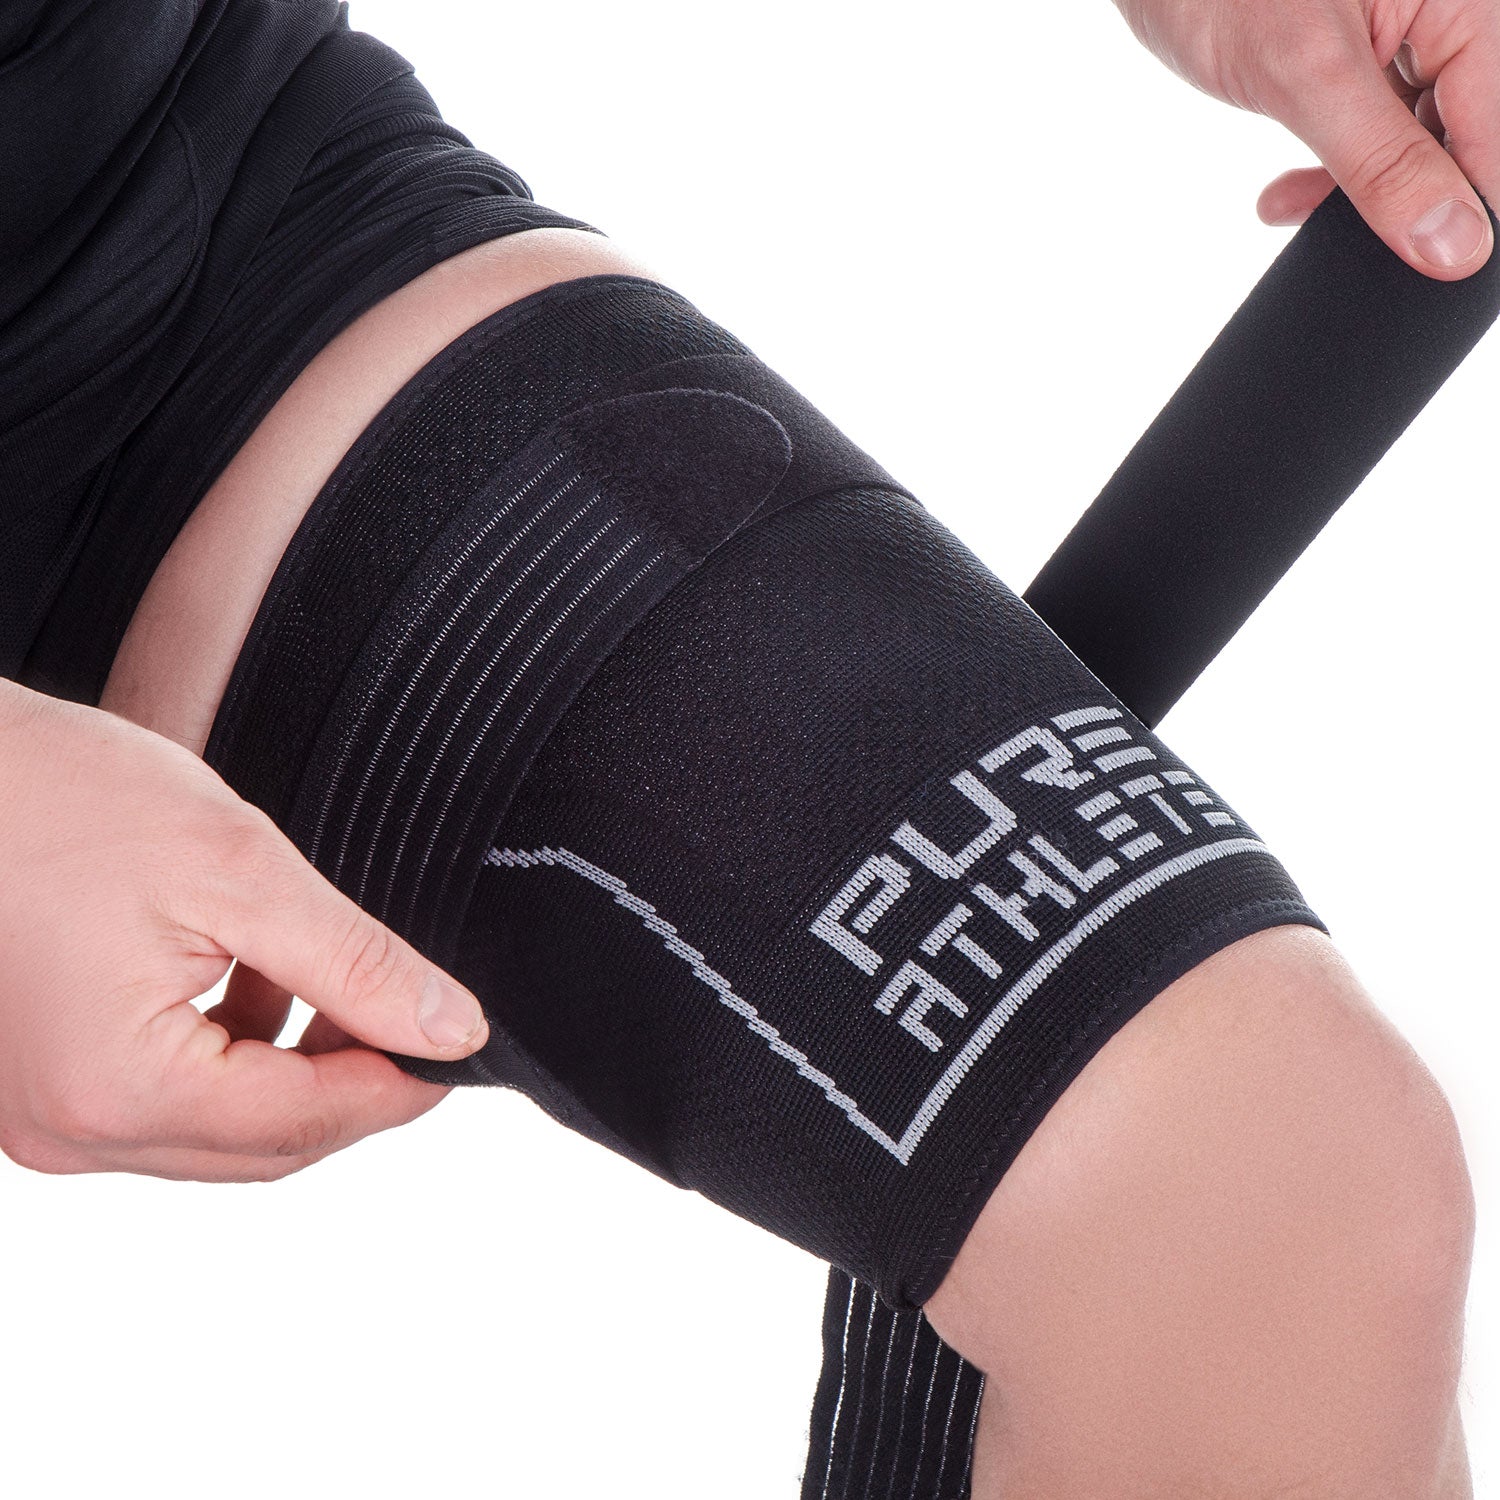 Compression Thigh Support Sleeve Hamstring Brace Sport Upper Leg Pain  Relief Gym 